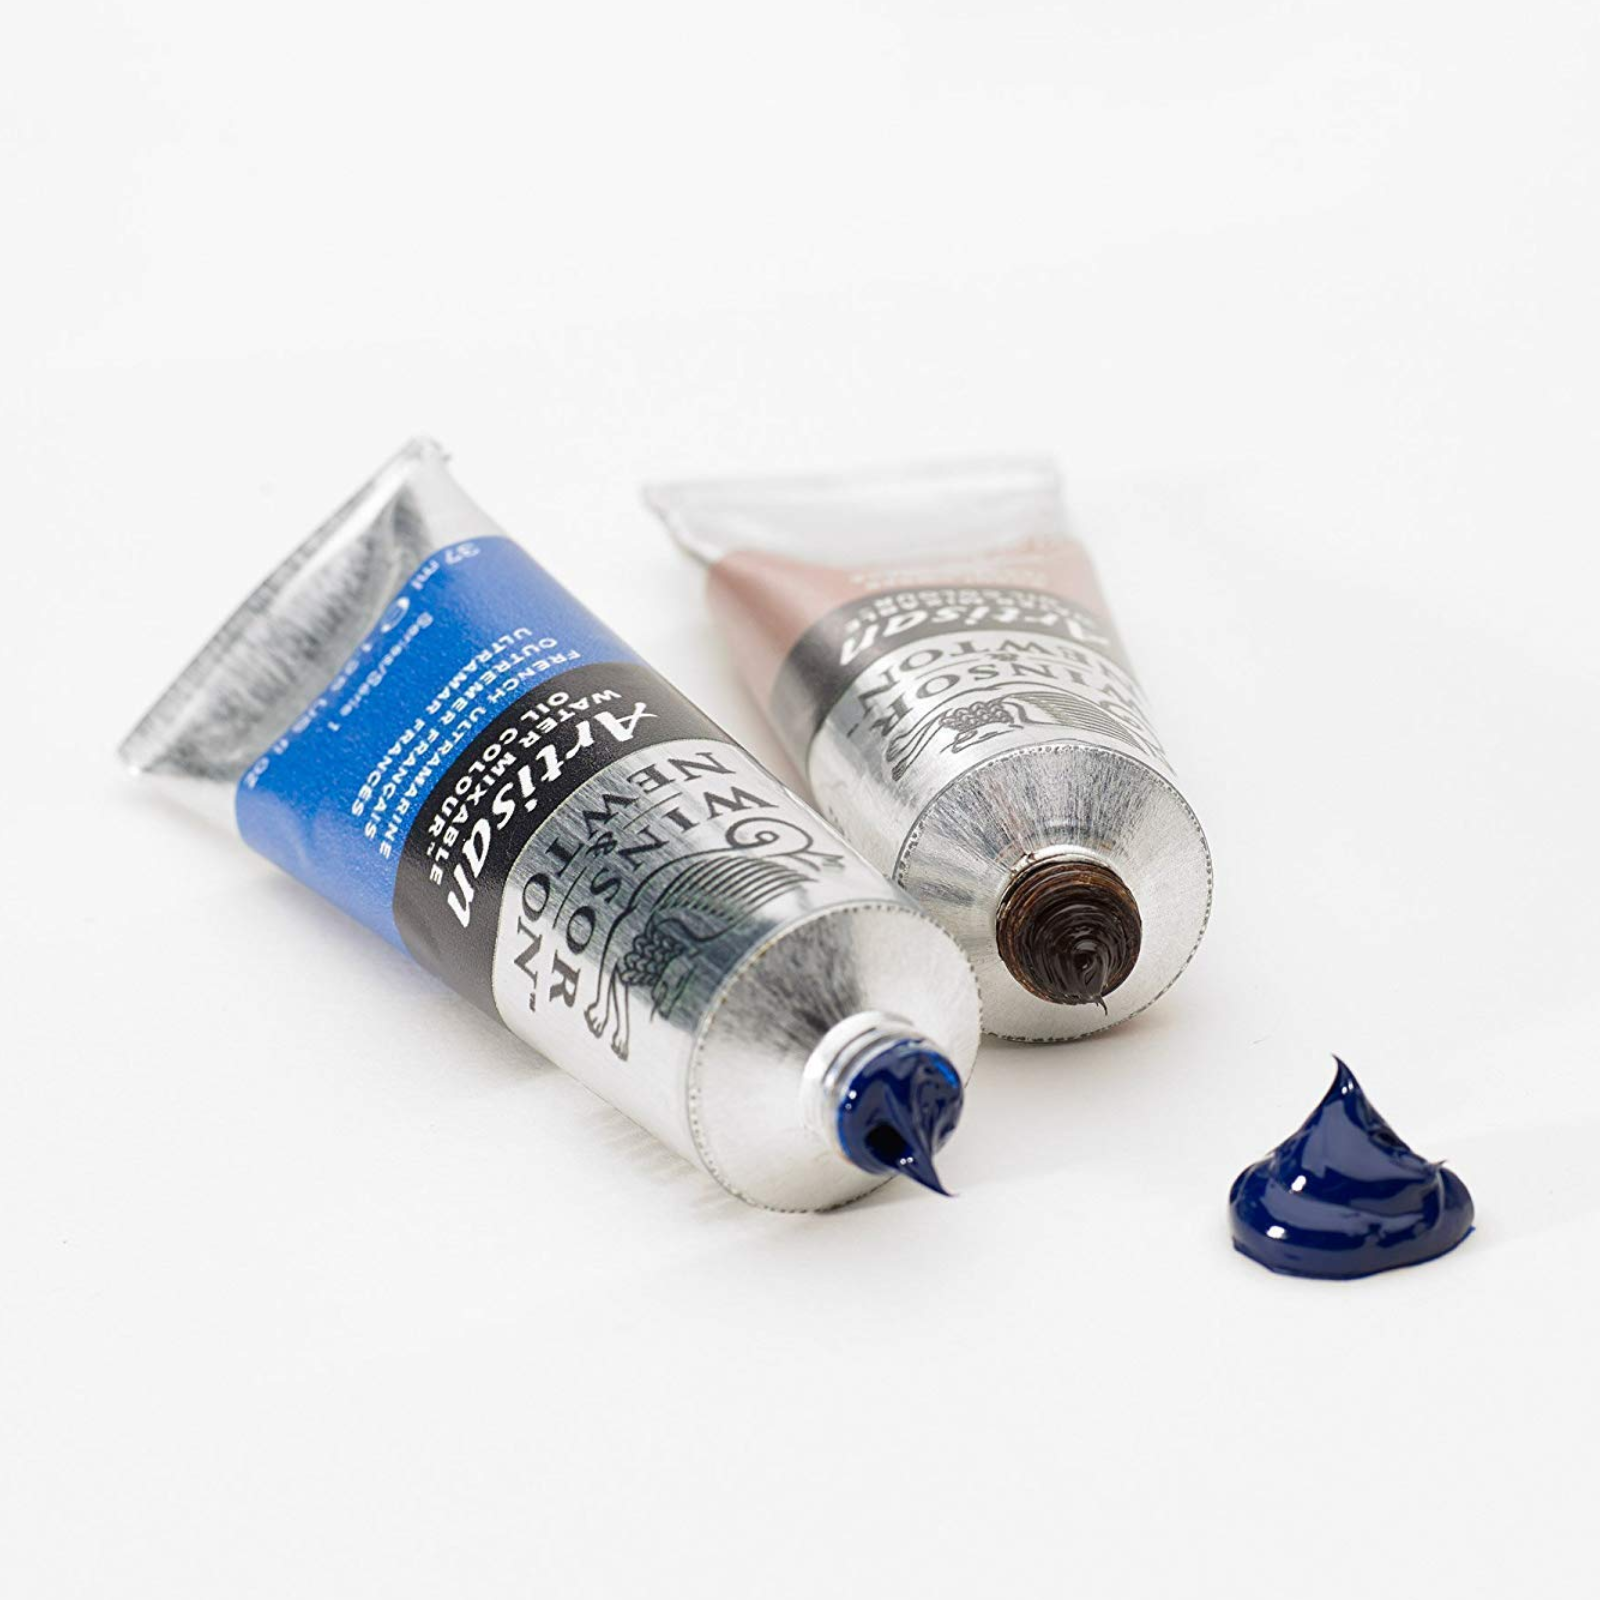 Winsor & Newton Artisan Water Mixable Oil Colour Set - Made from modified linseed and safflower oils